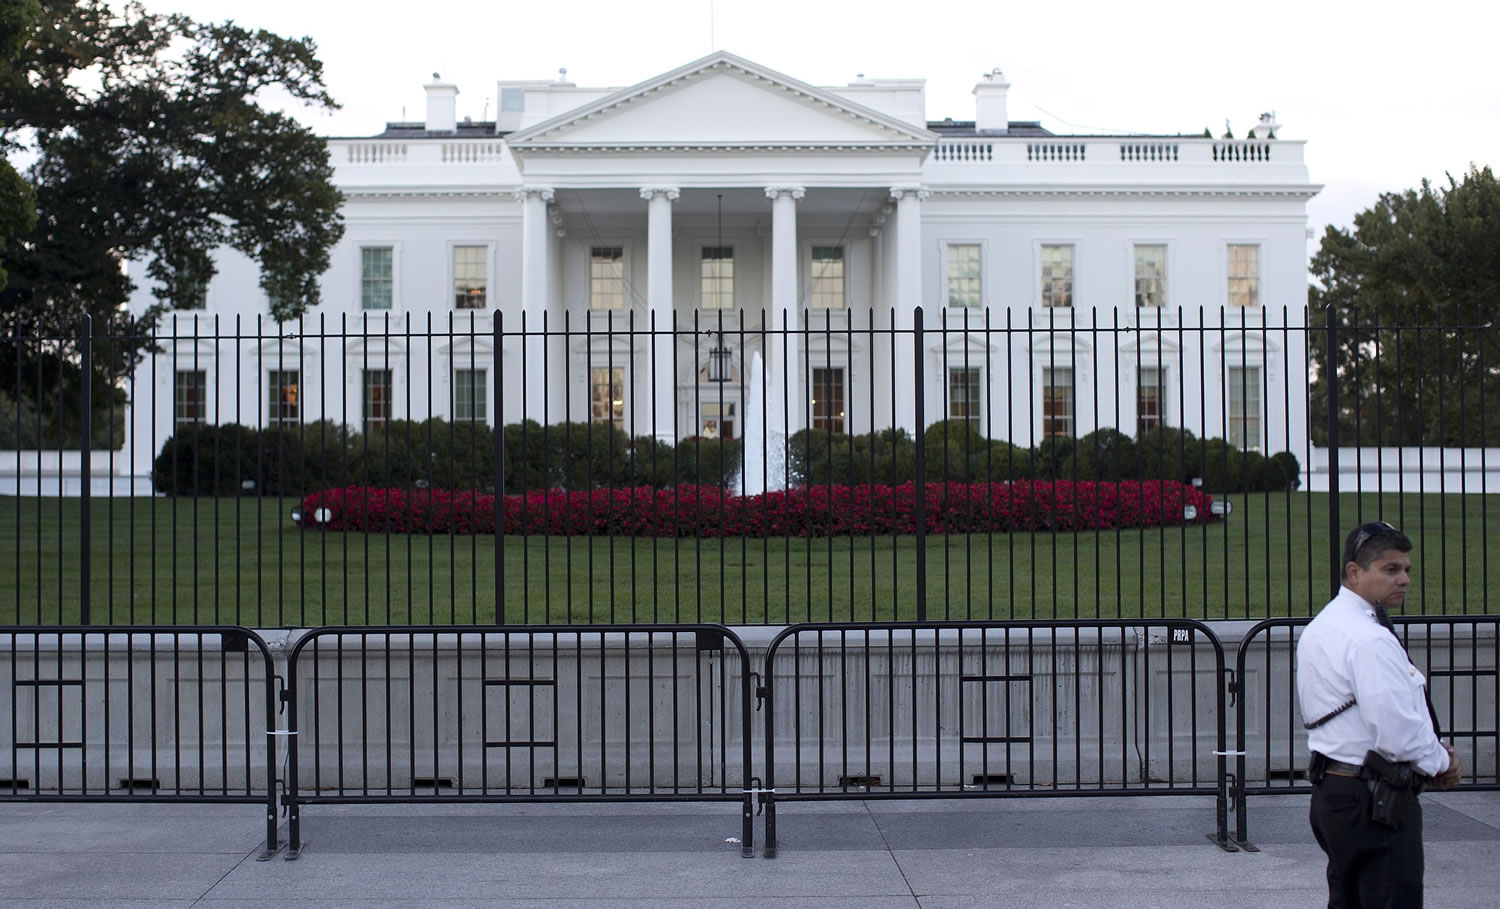 The White House is seen through two layers of fence in Washington on Tuesday.